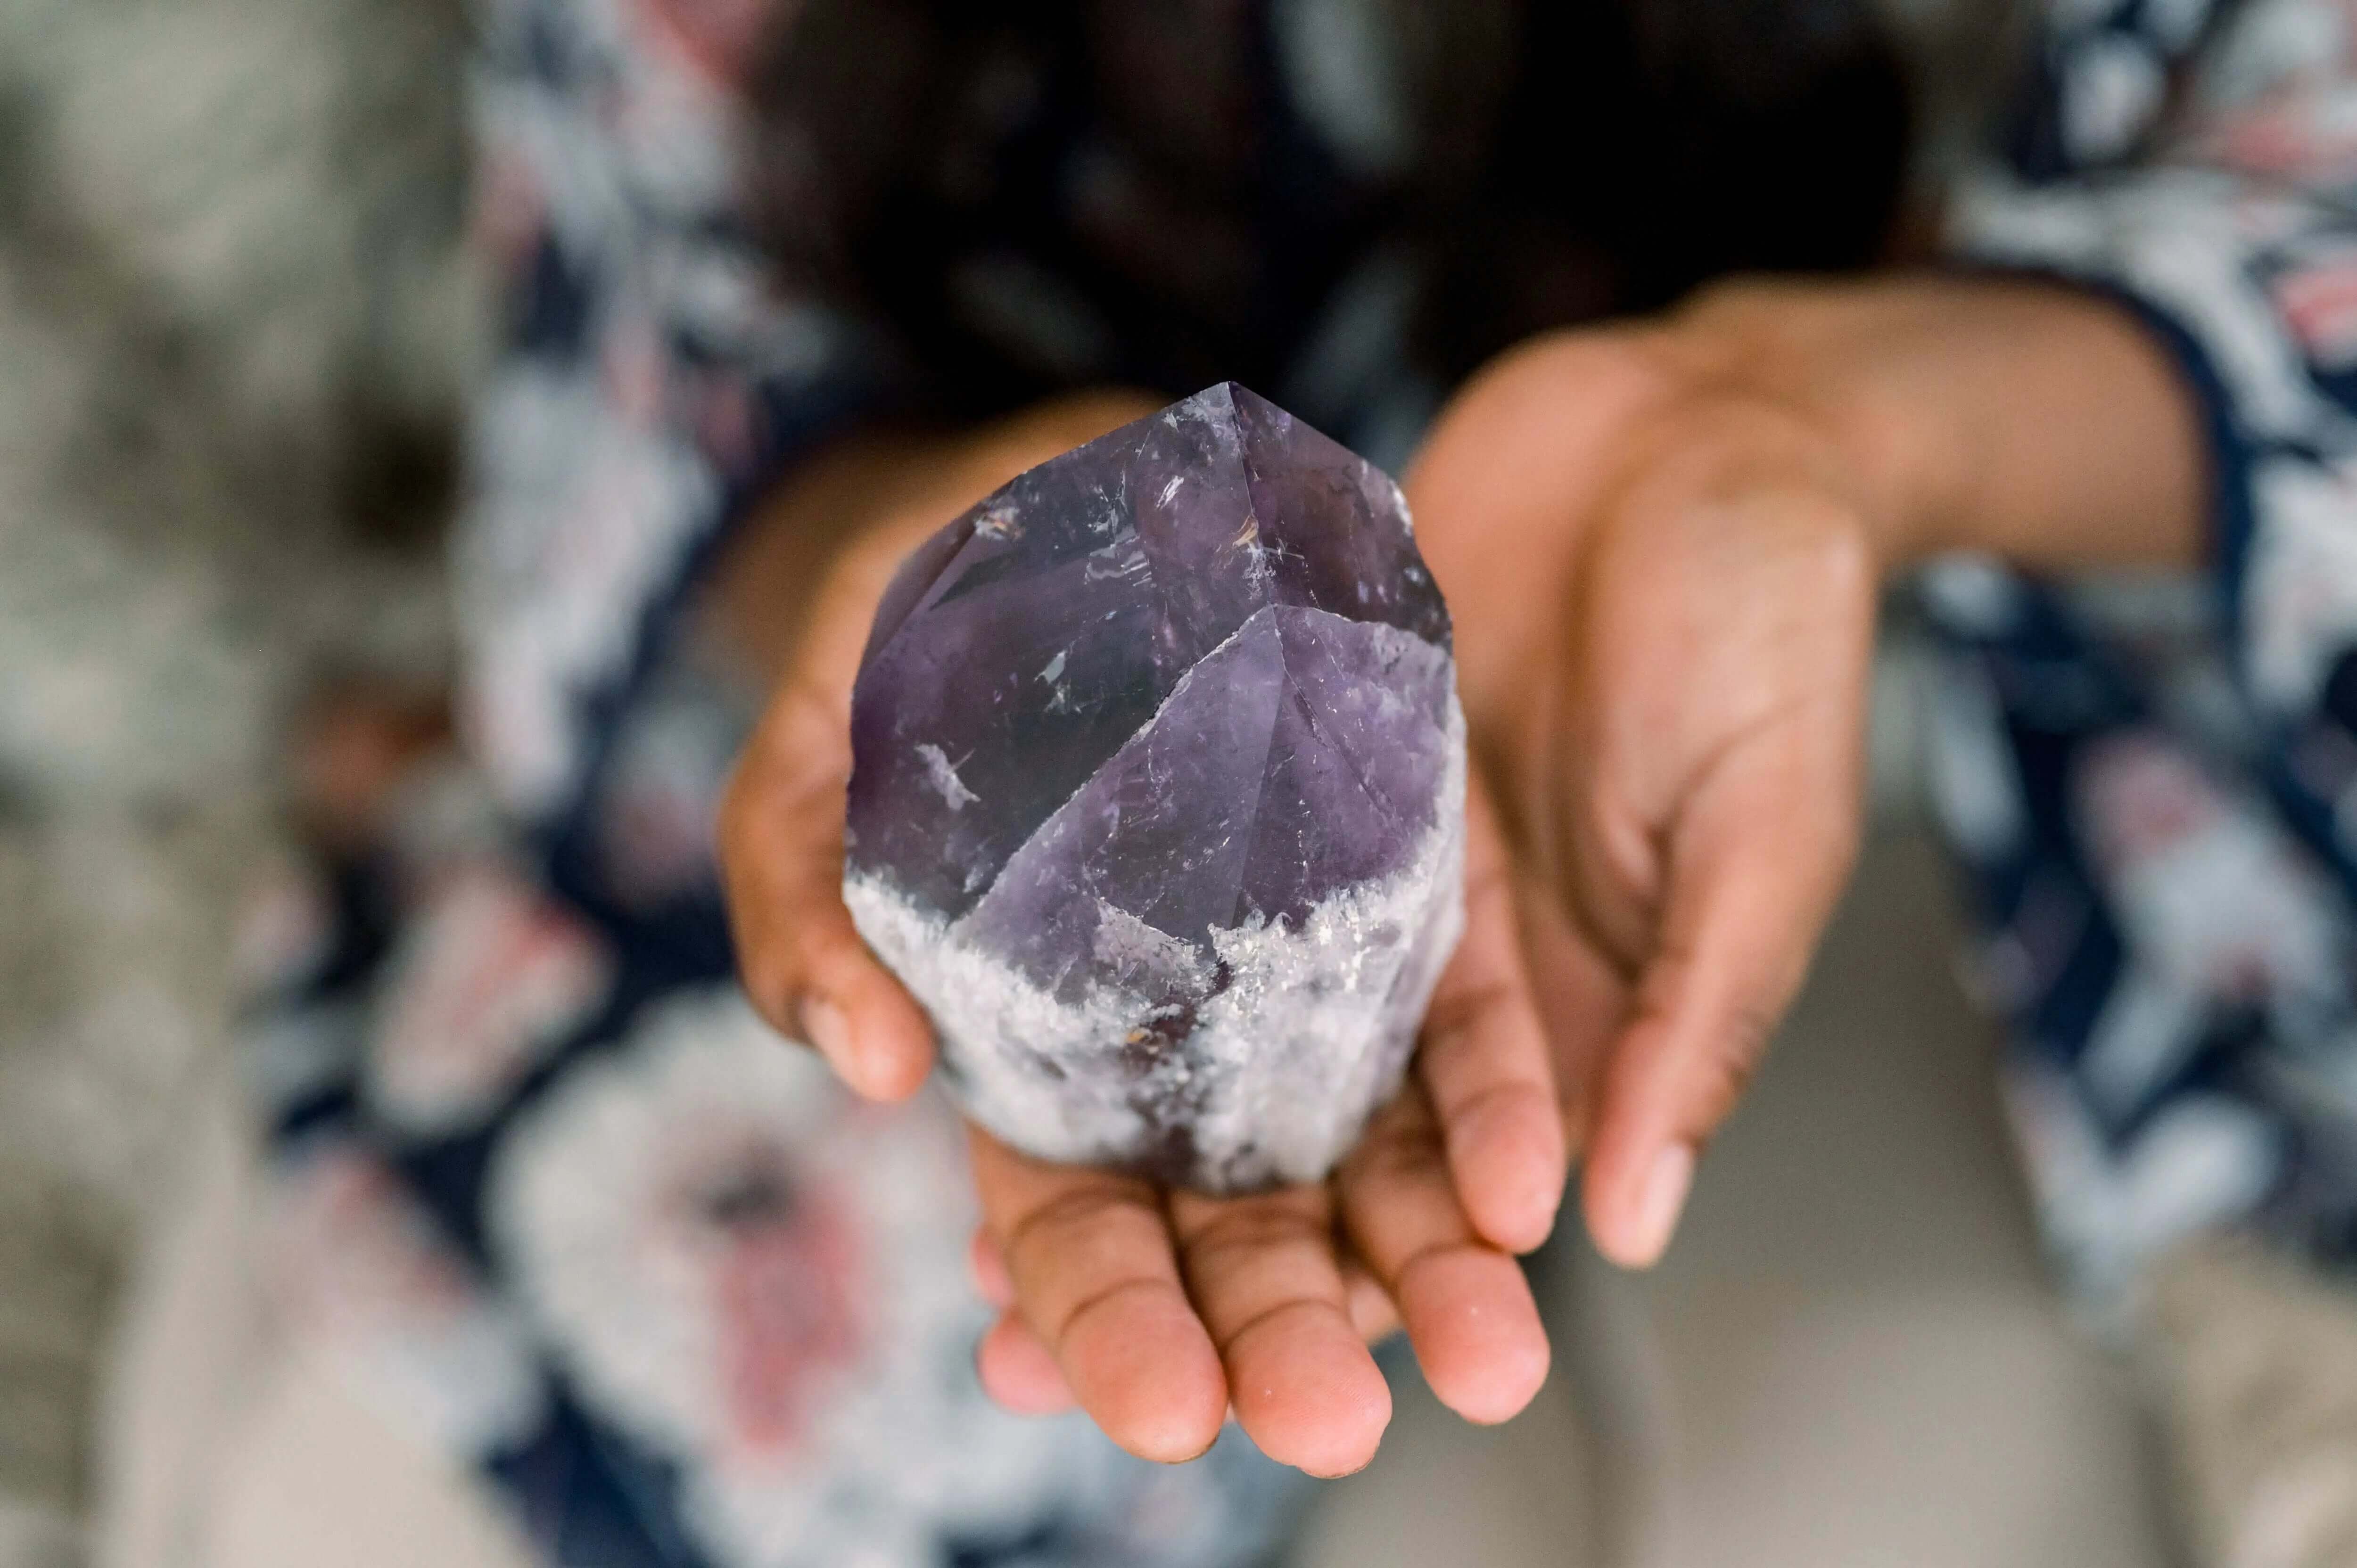 A woman holding an amethyst crystal in her hands